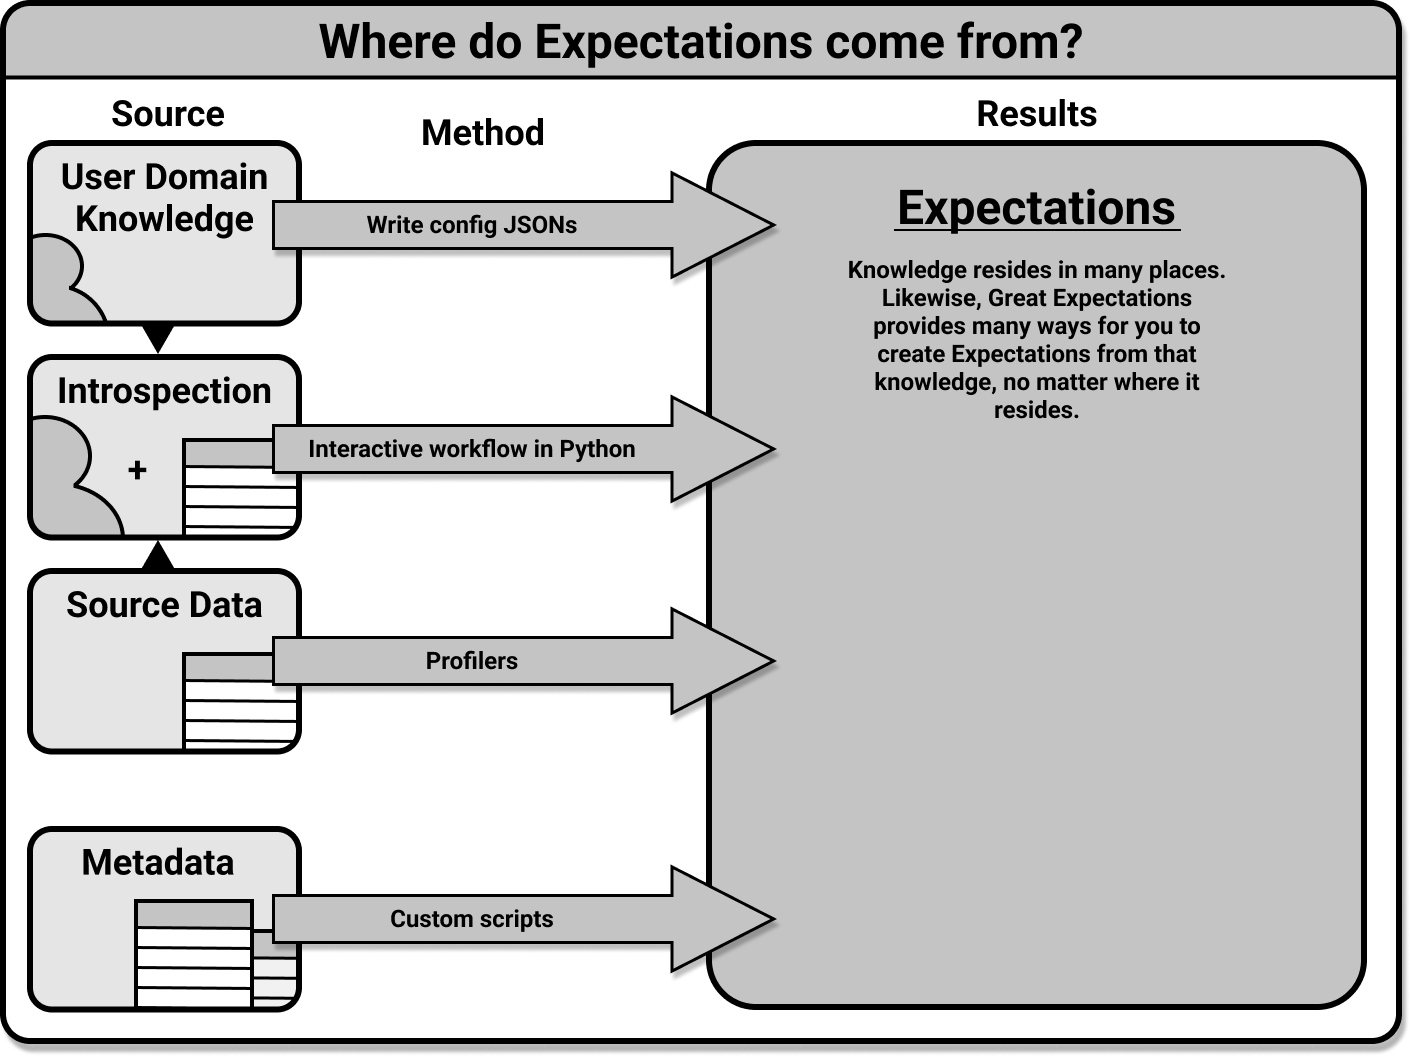 Where do Expectations come from?